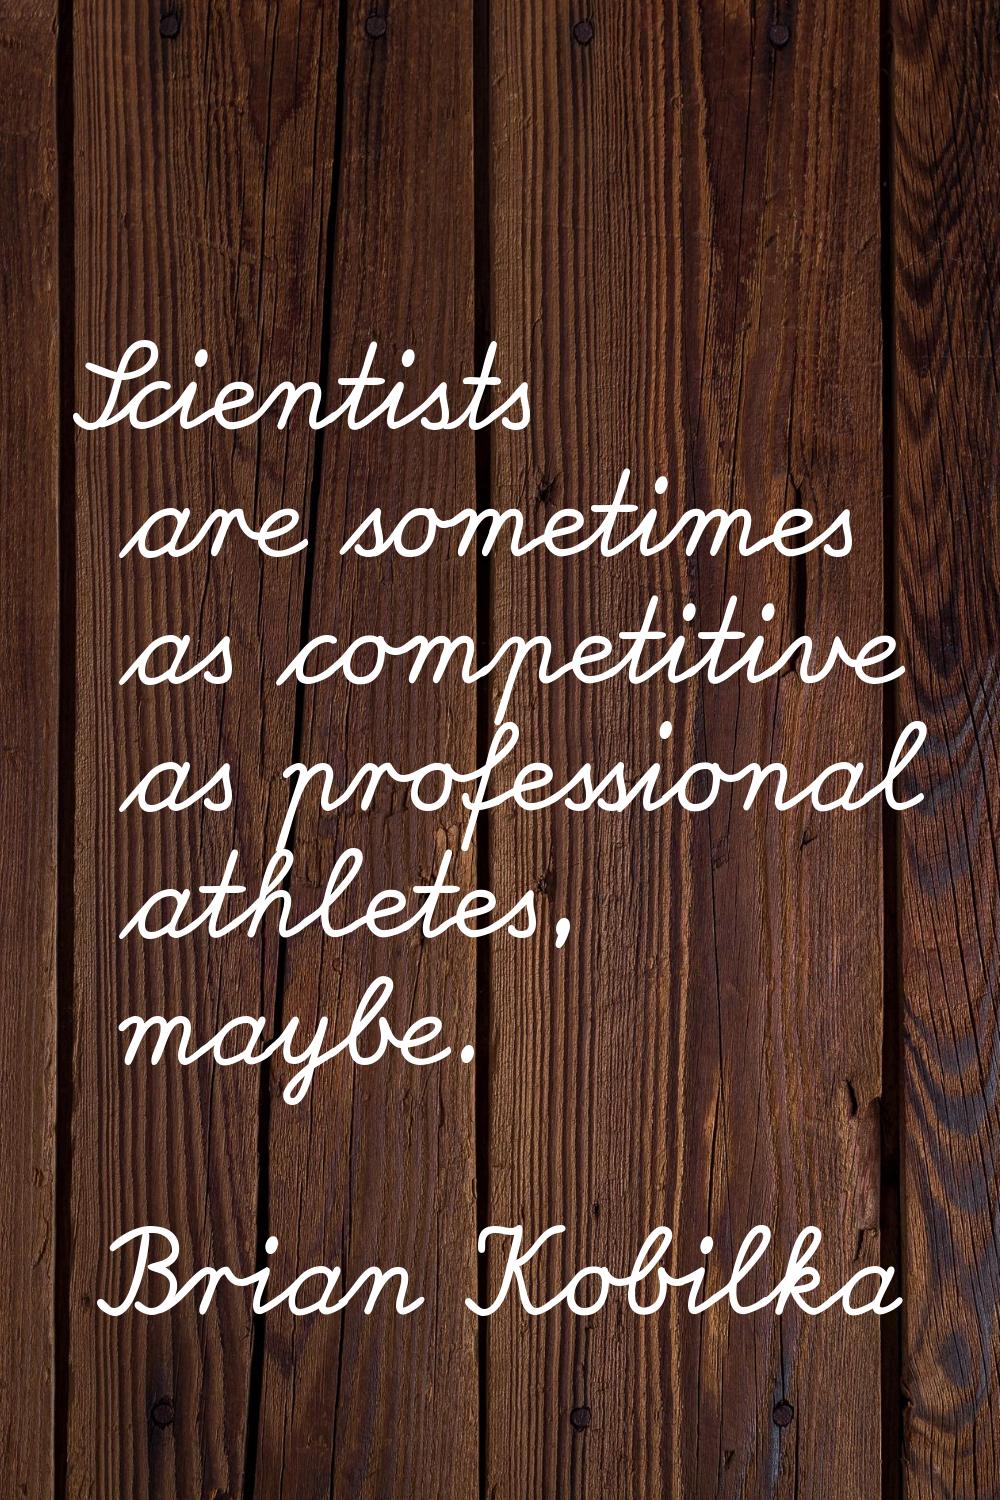 Scientists are sometimes as competitive as professional athletes, maybe.